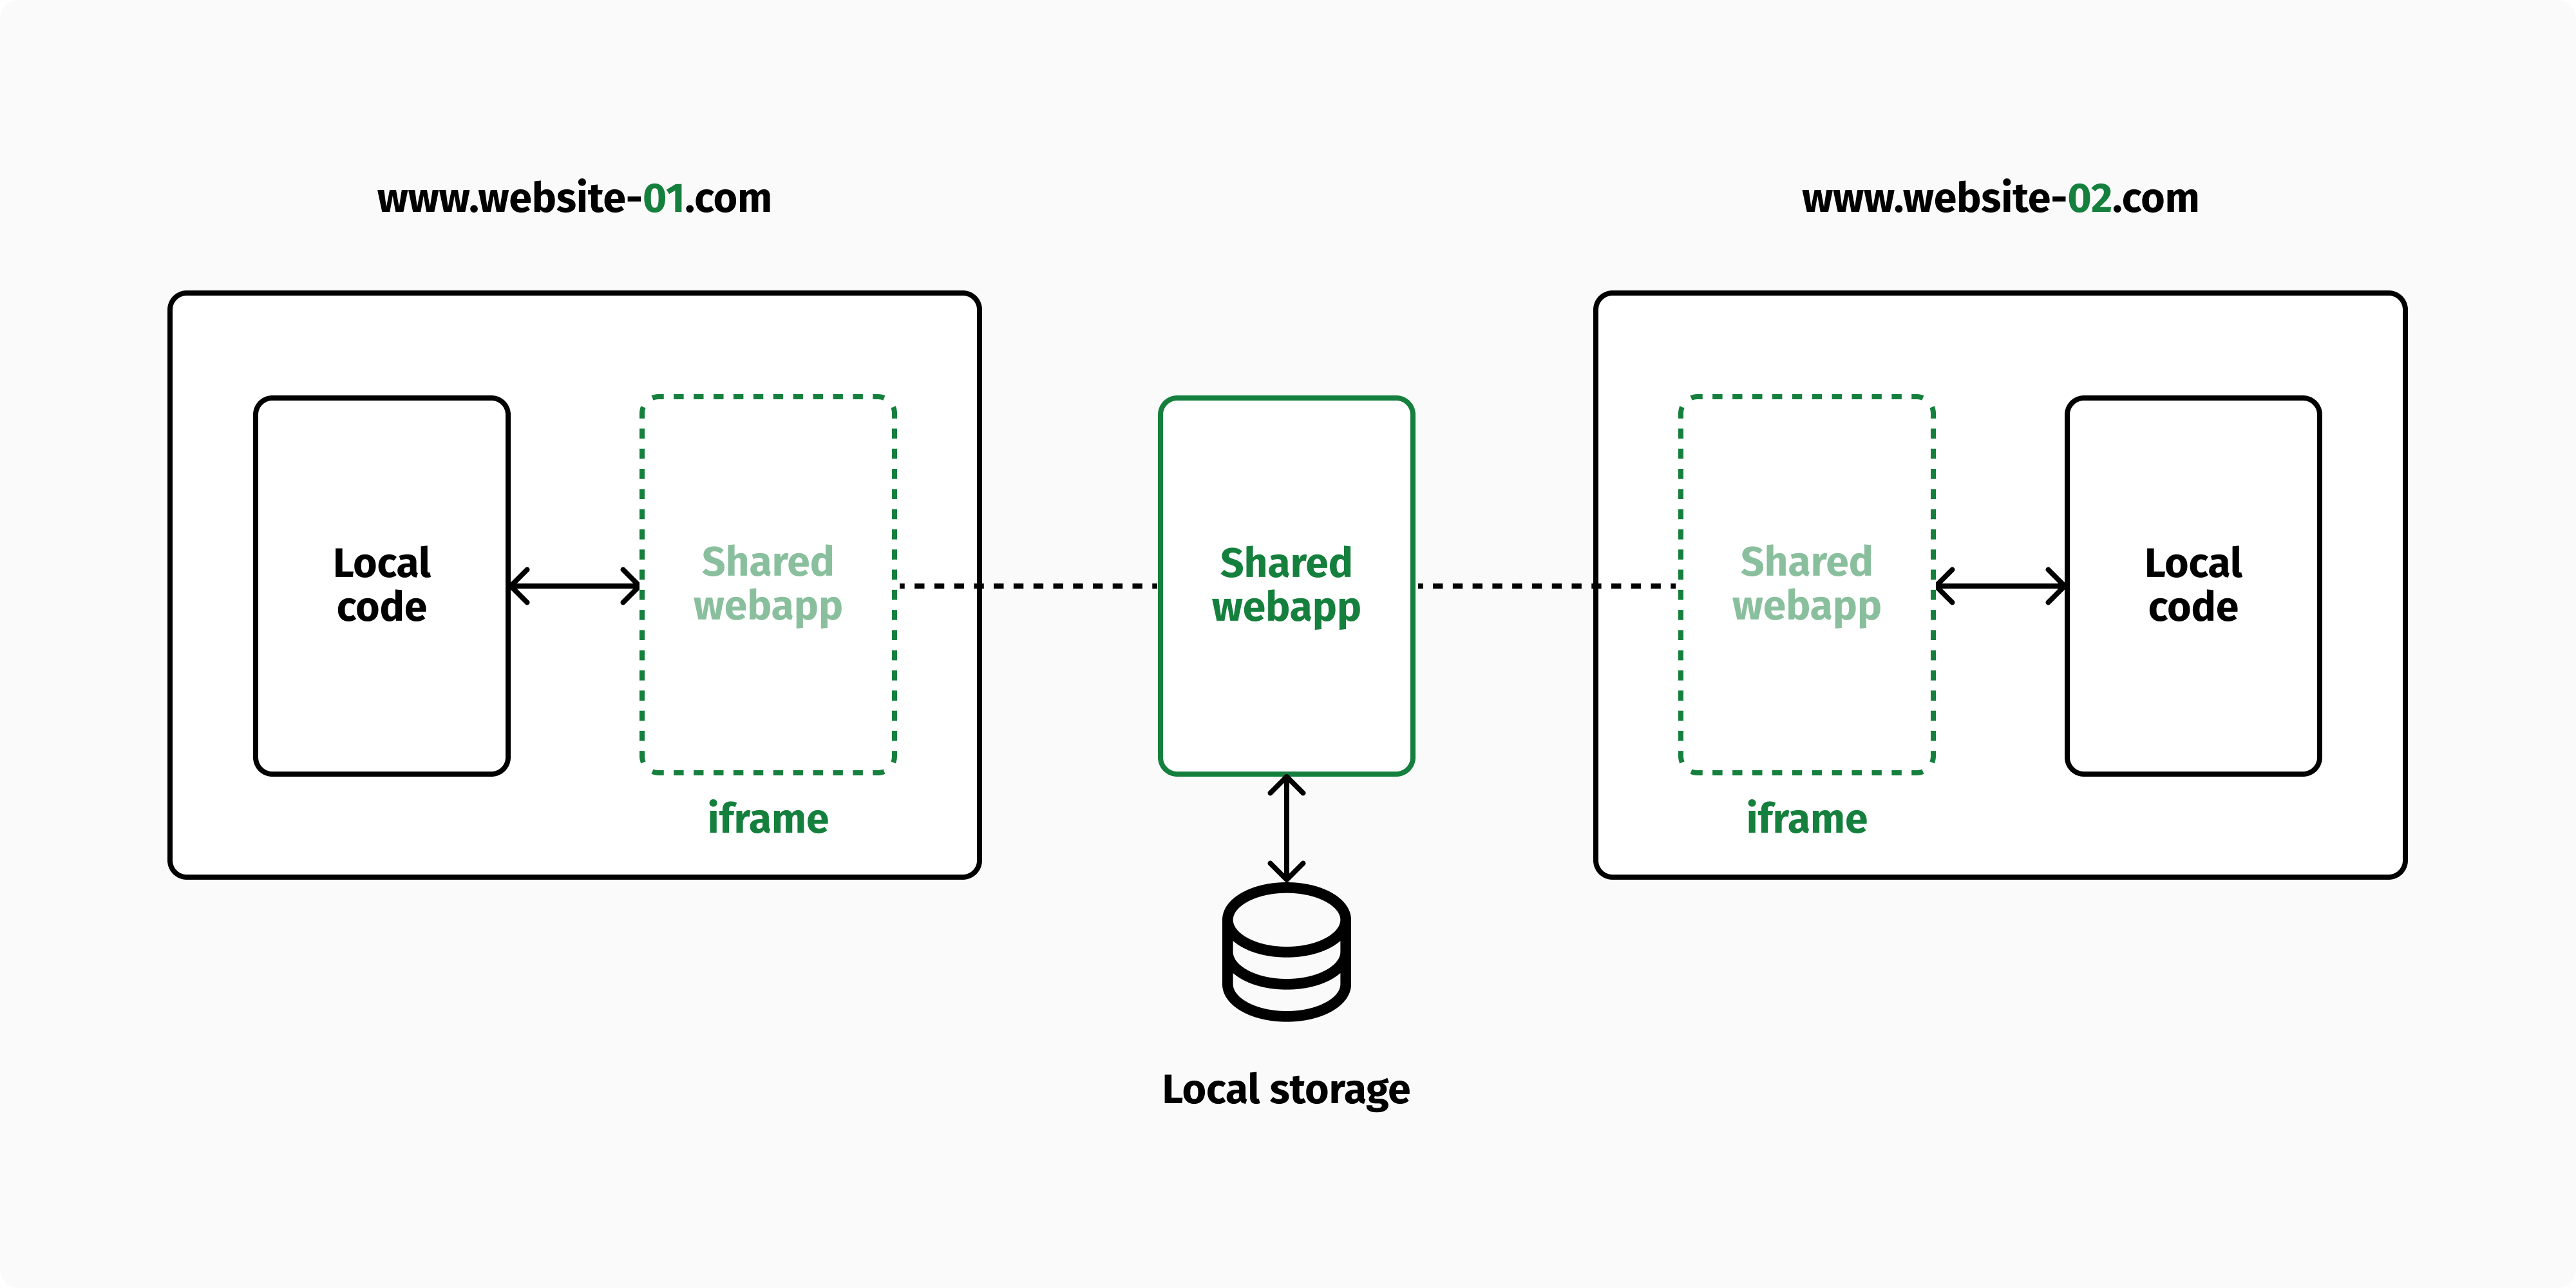 Two websites can share storage using iframes.